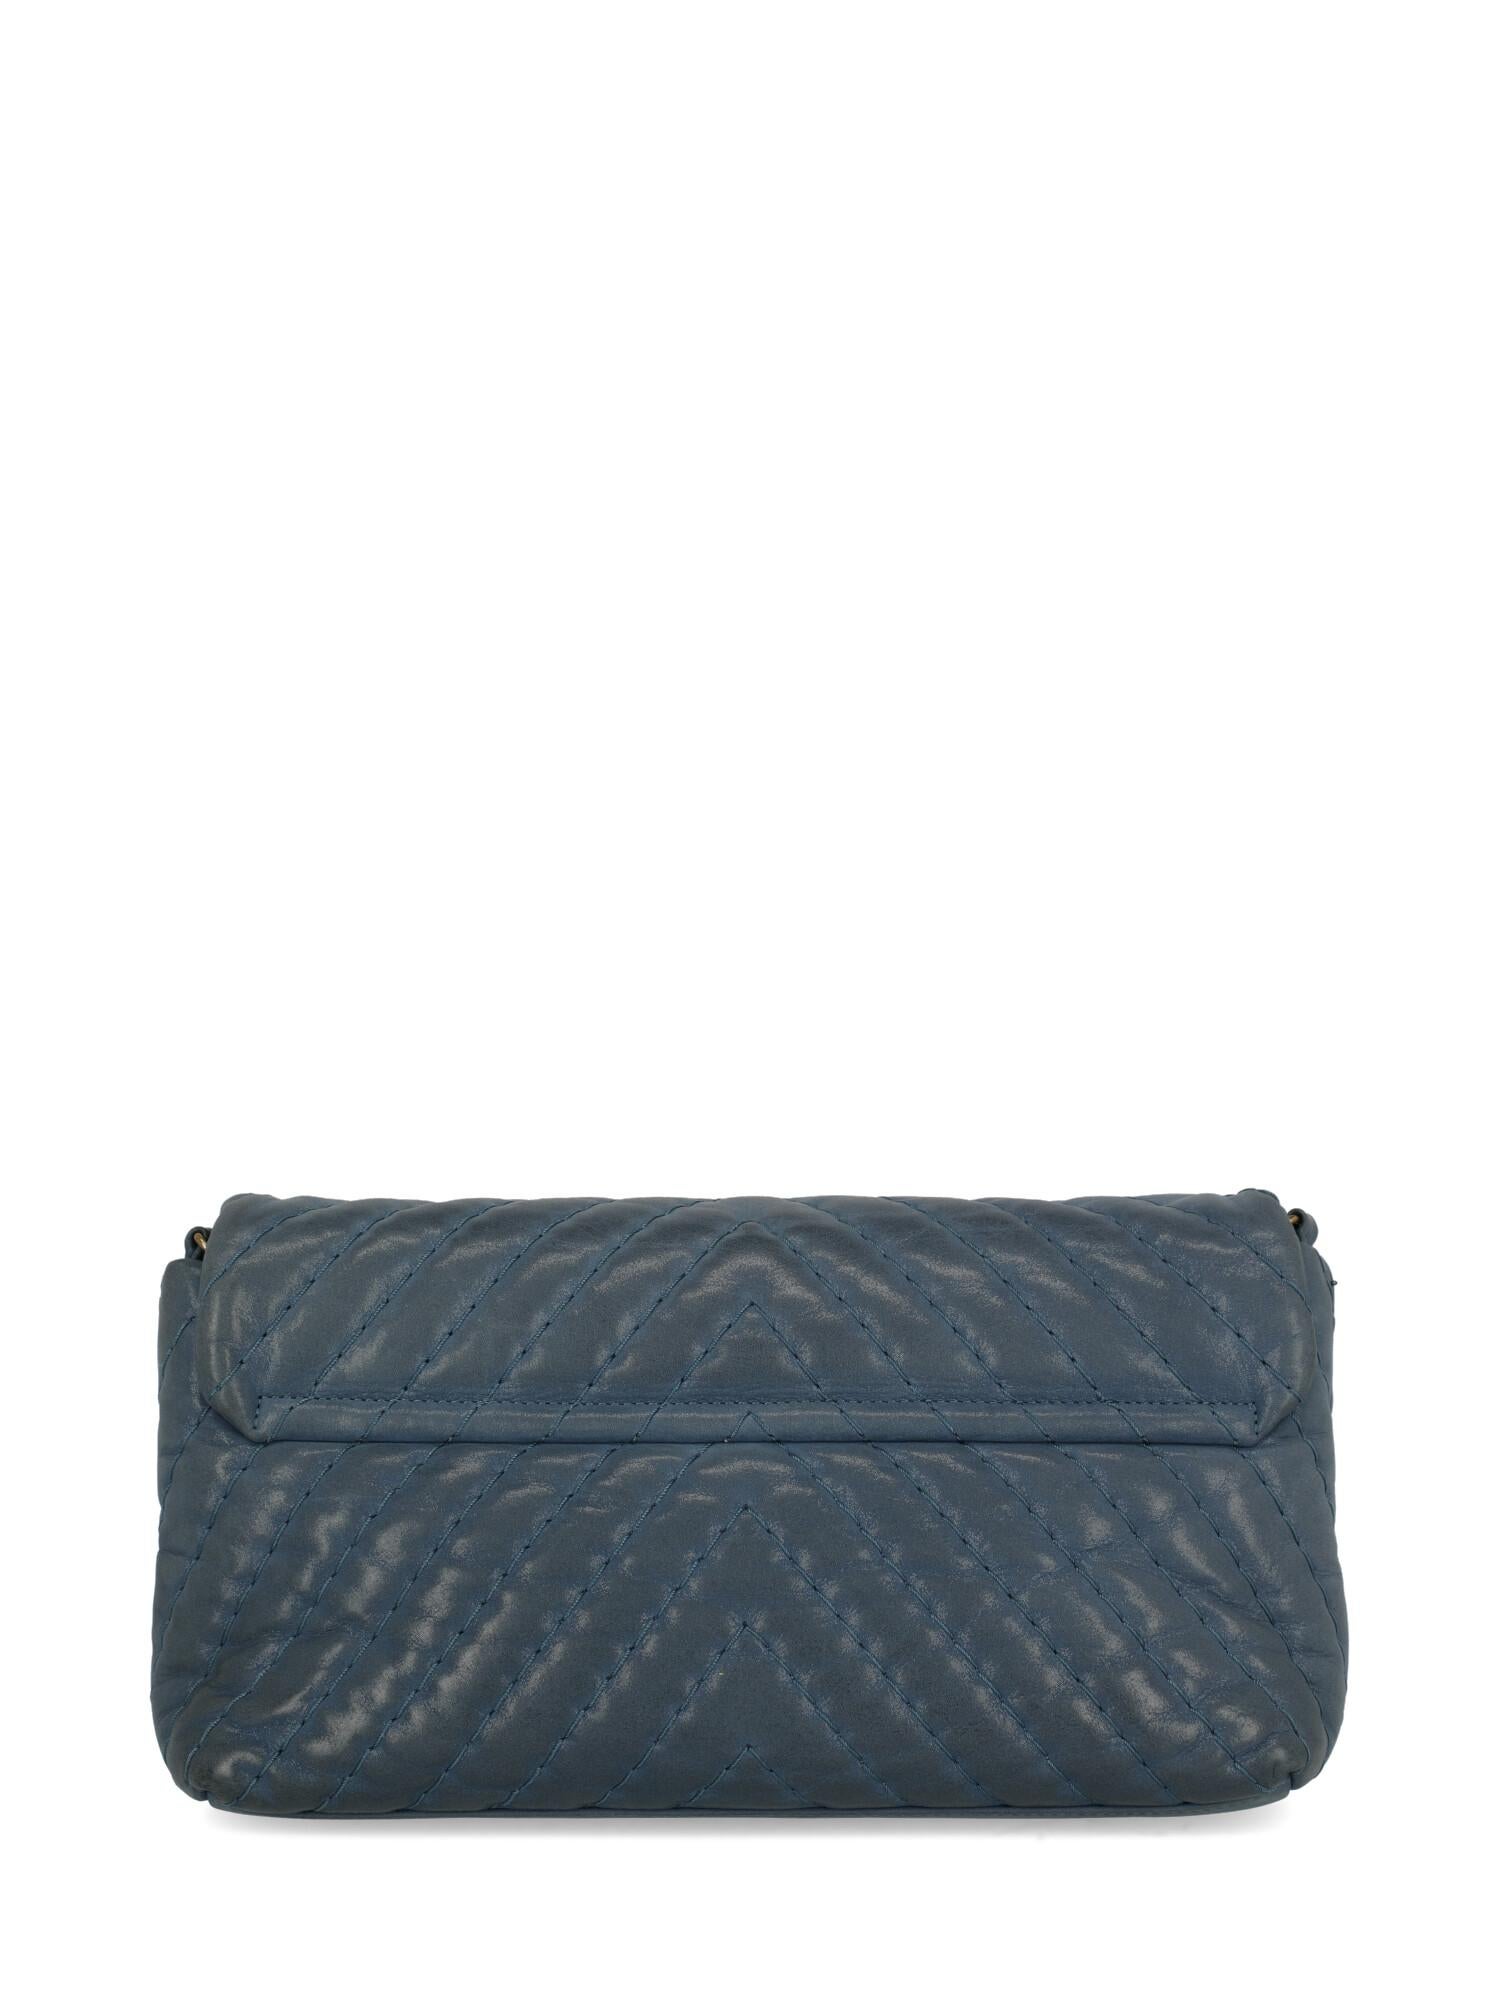 Black Chanel Women's Timeless Blue Fabric For Sale